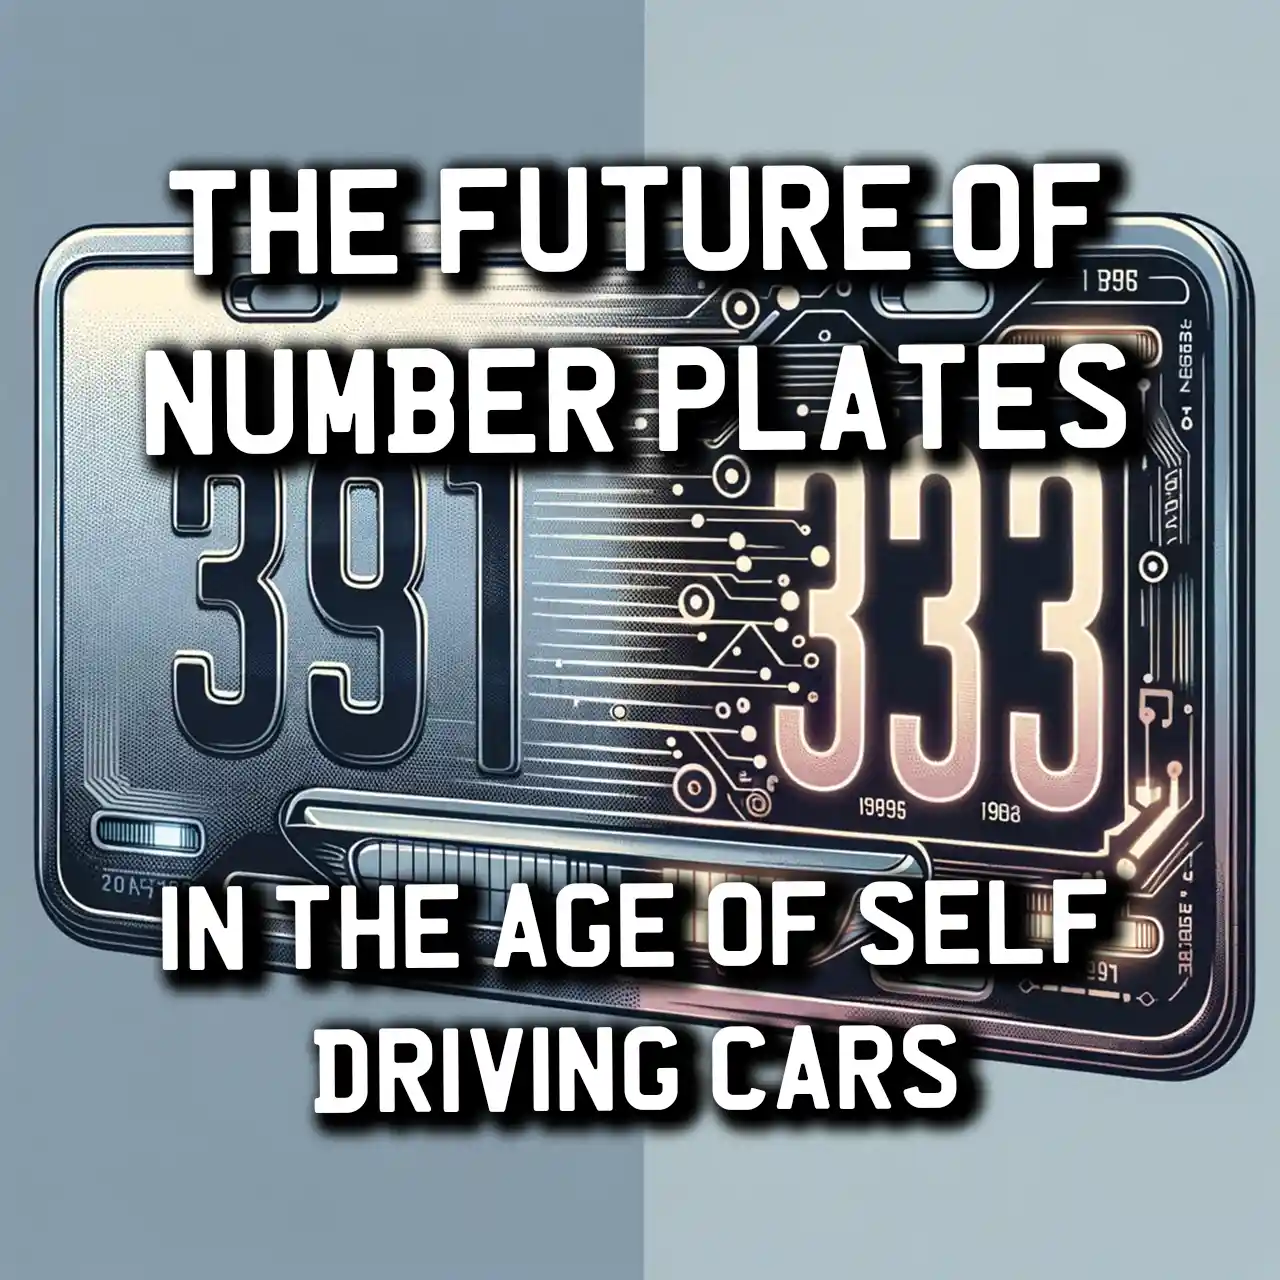 SurePlates The Future of Number Plates Will We Still Need Them in the Age of Self-Driving Cars